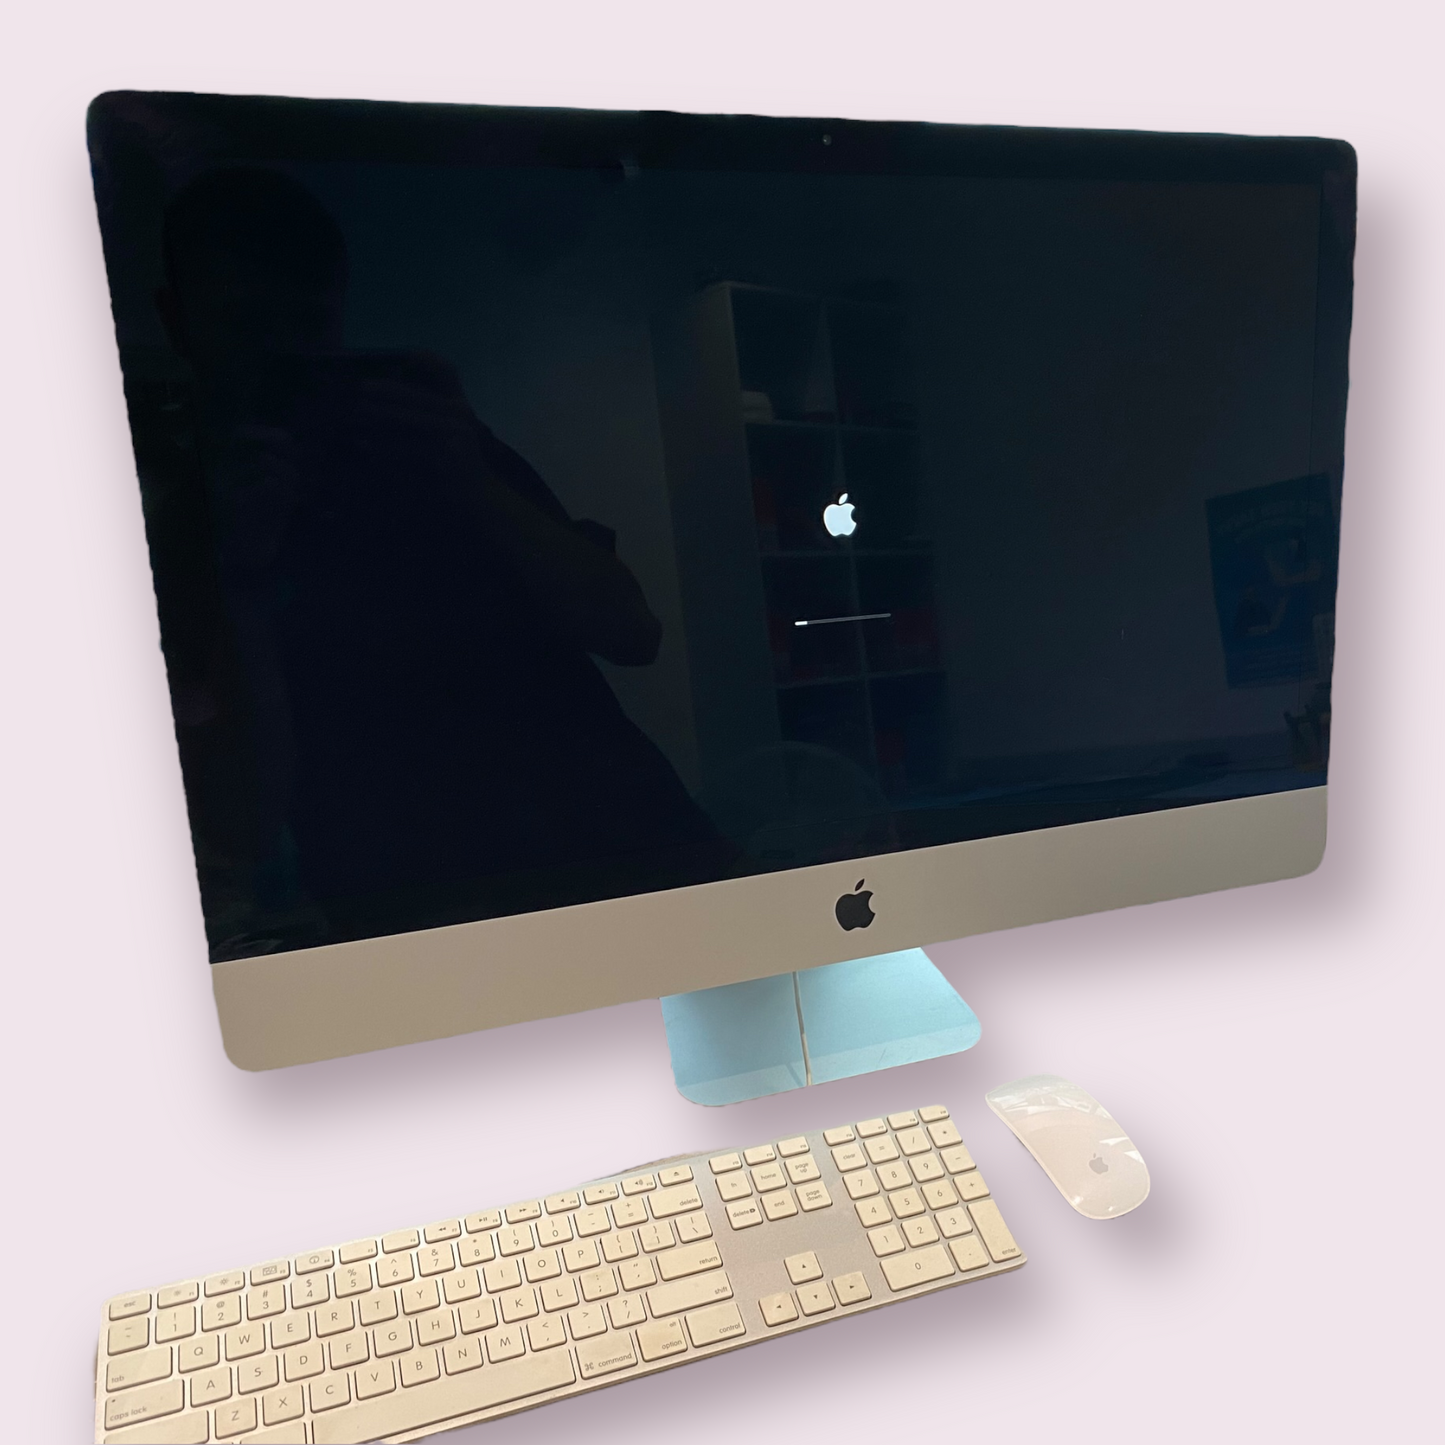 Apple iMac 27” Late 2013 i5 @ 3.2GHz 1TB HDD 8GB RAM Max OS Catalina With Keyboard and Mouse